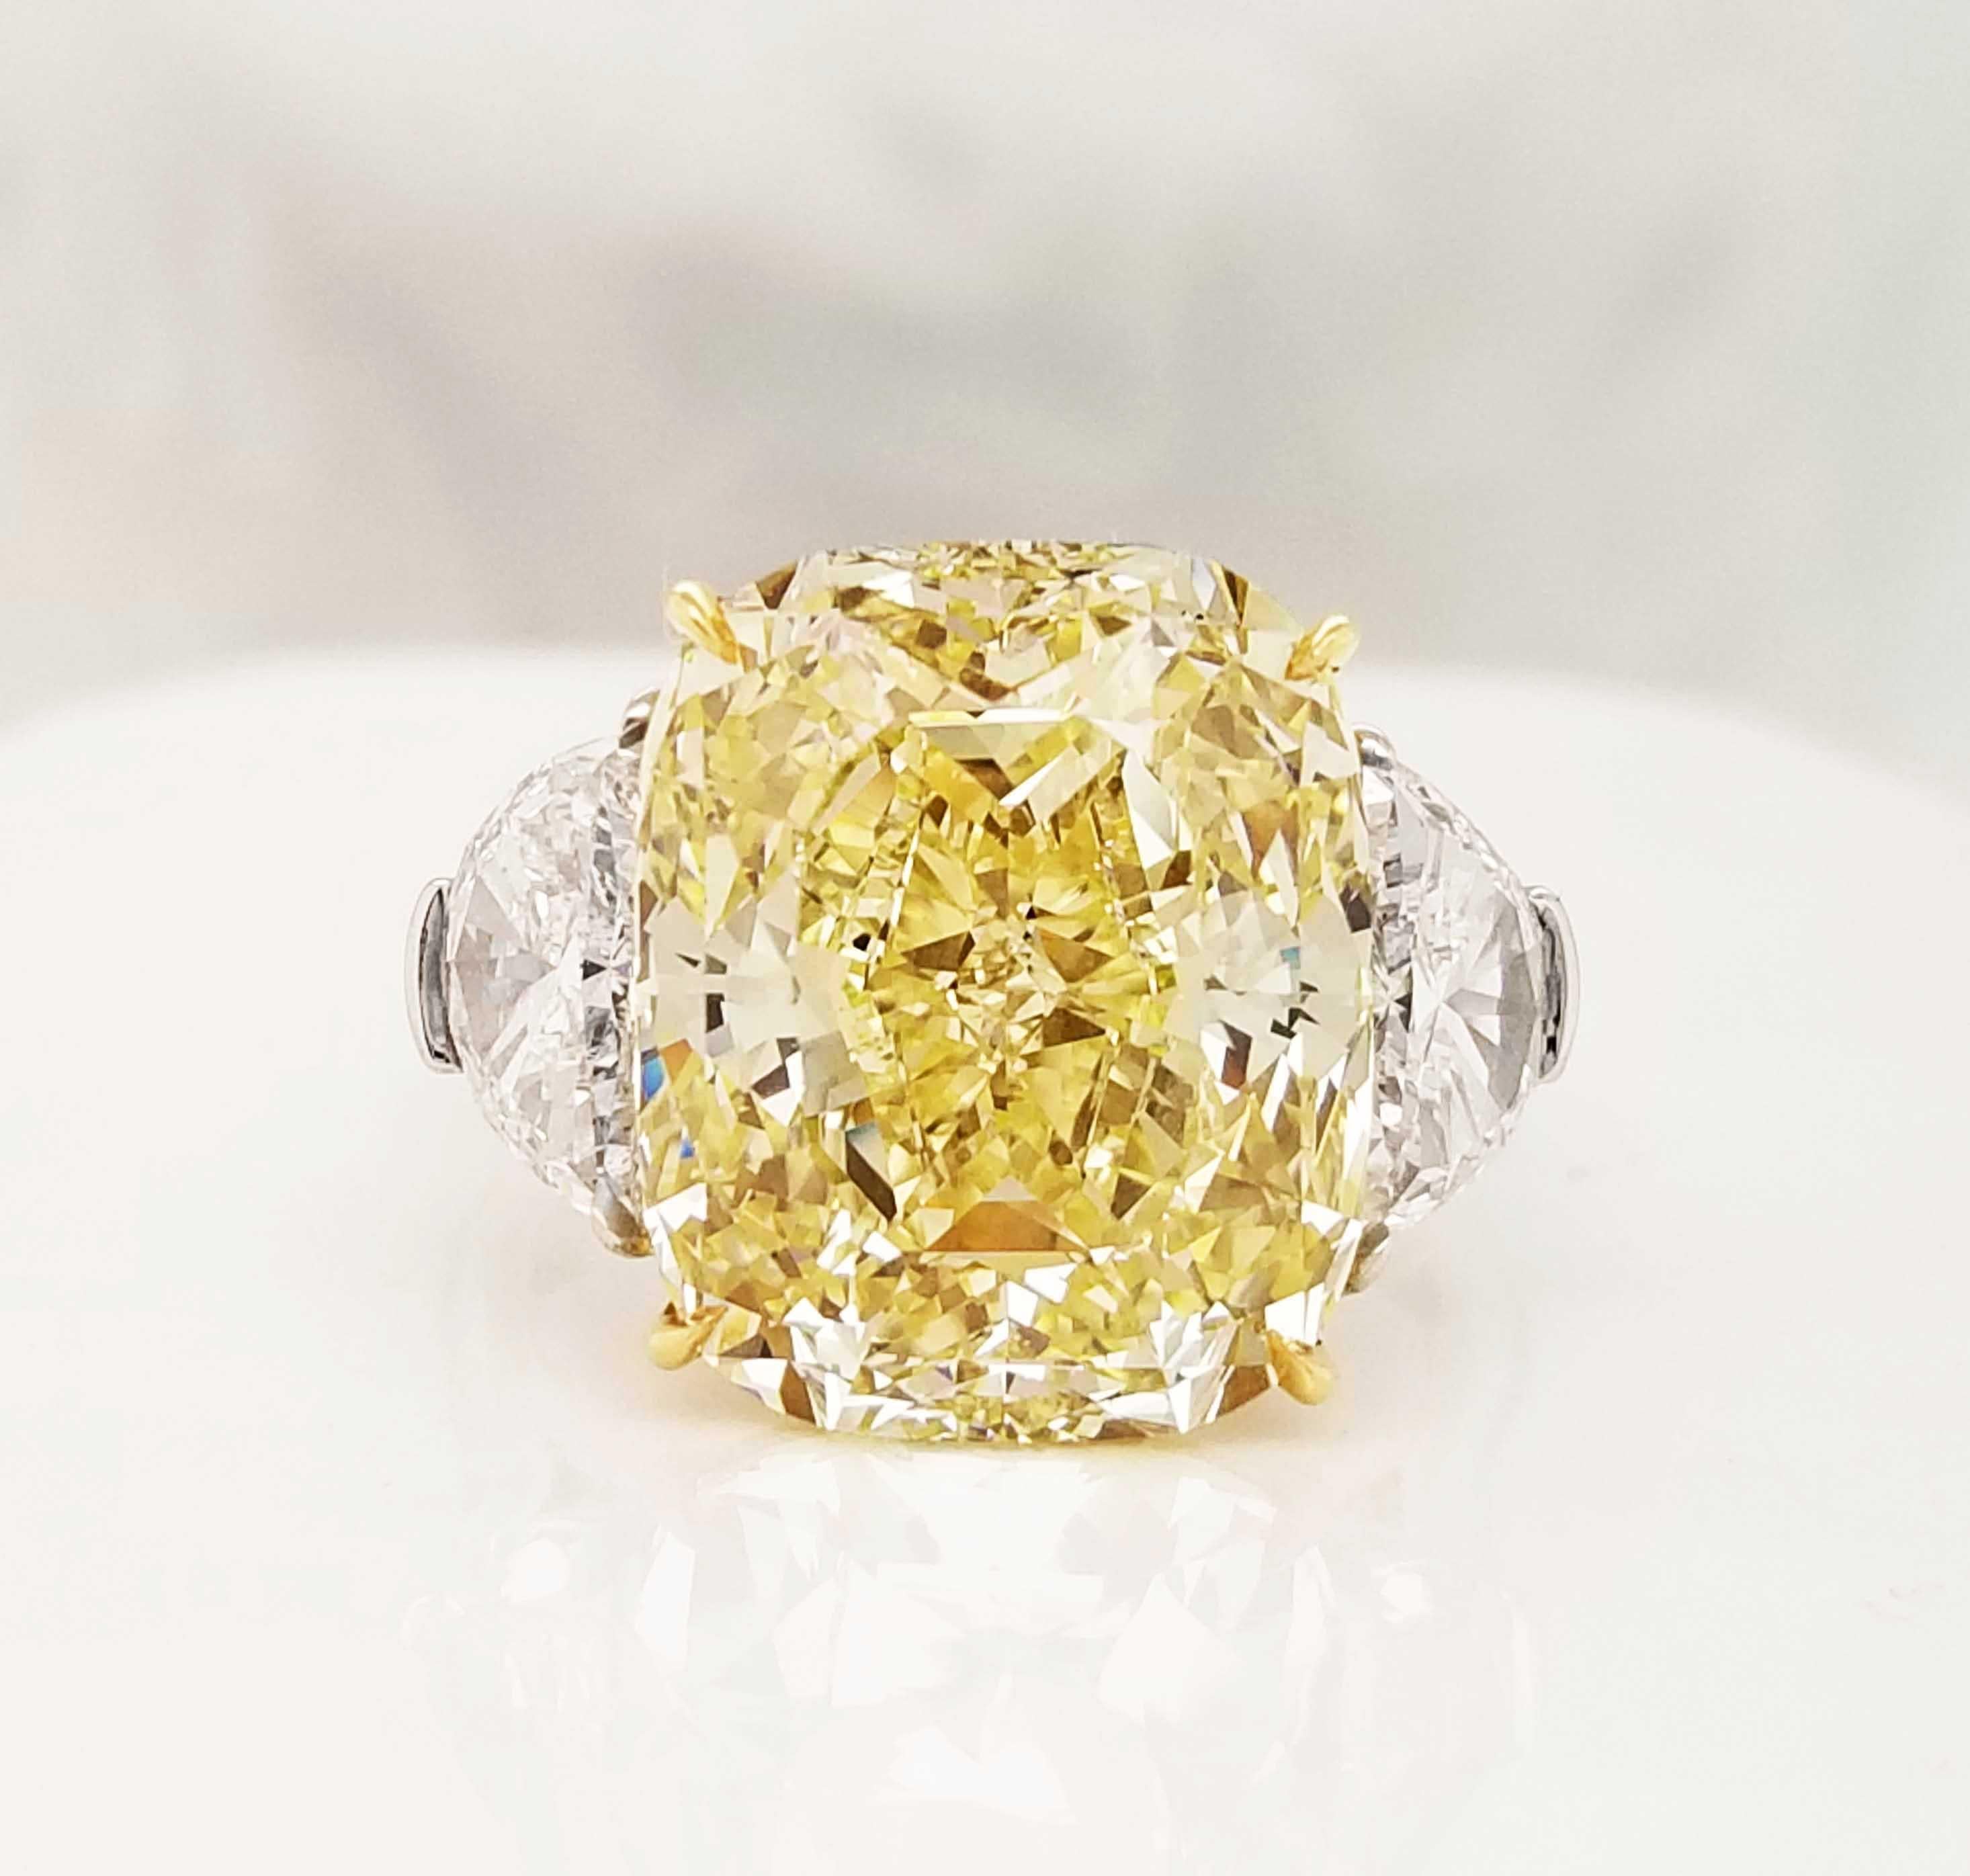 Contemporary SCARSELLI 11 Carat Fancy Yellow Diamond Engagement Ring in Platinum For Sale